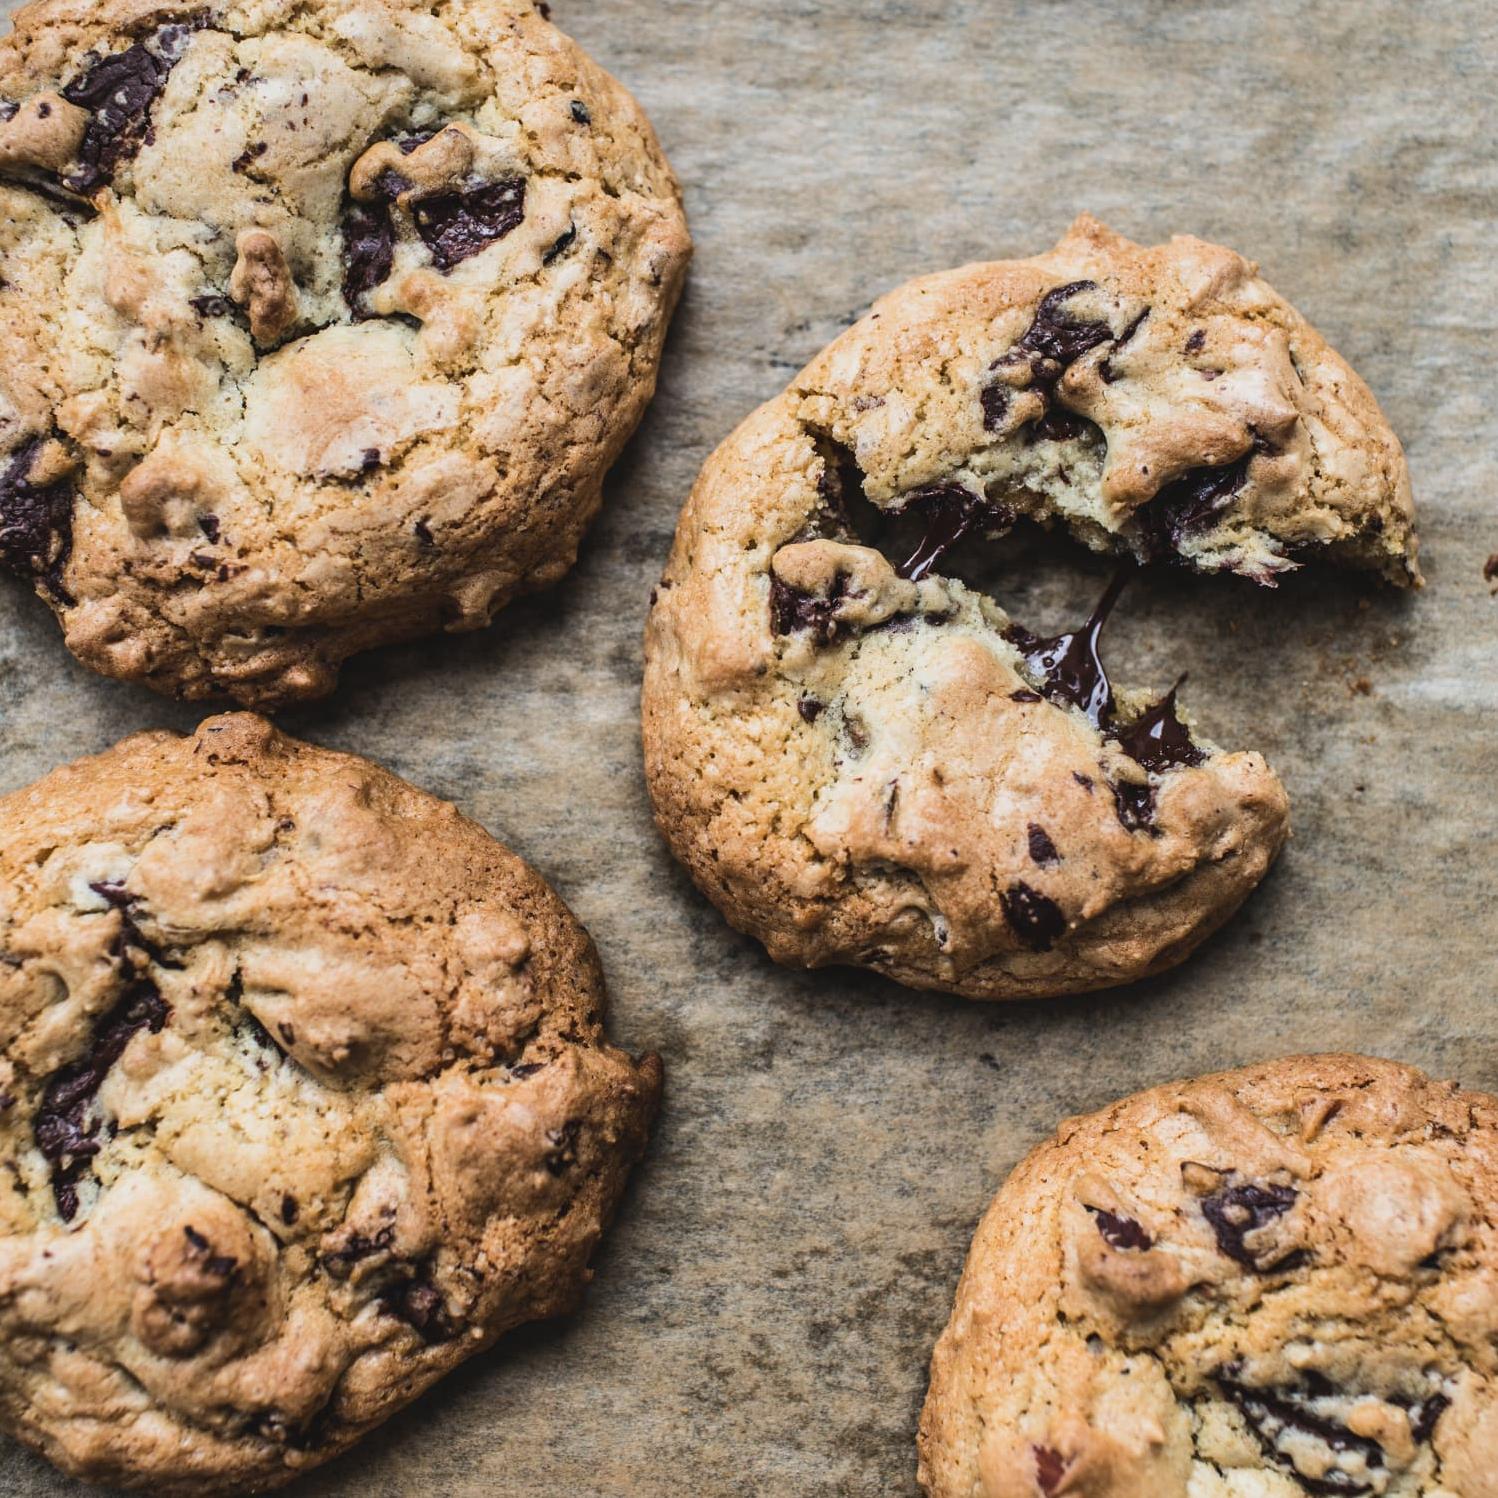  These cookies are so good, they'll wake you up better than any espresso shot!